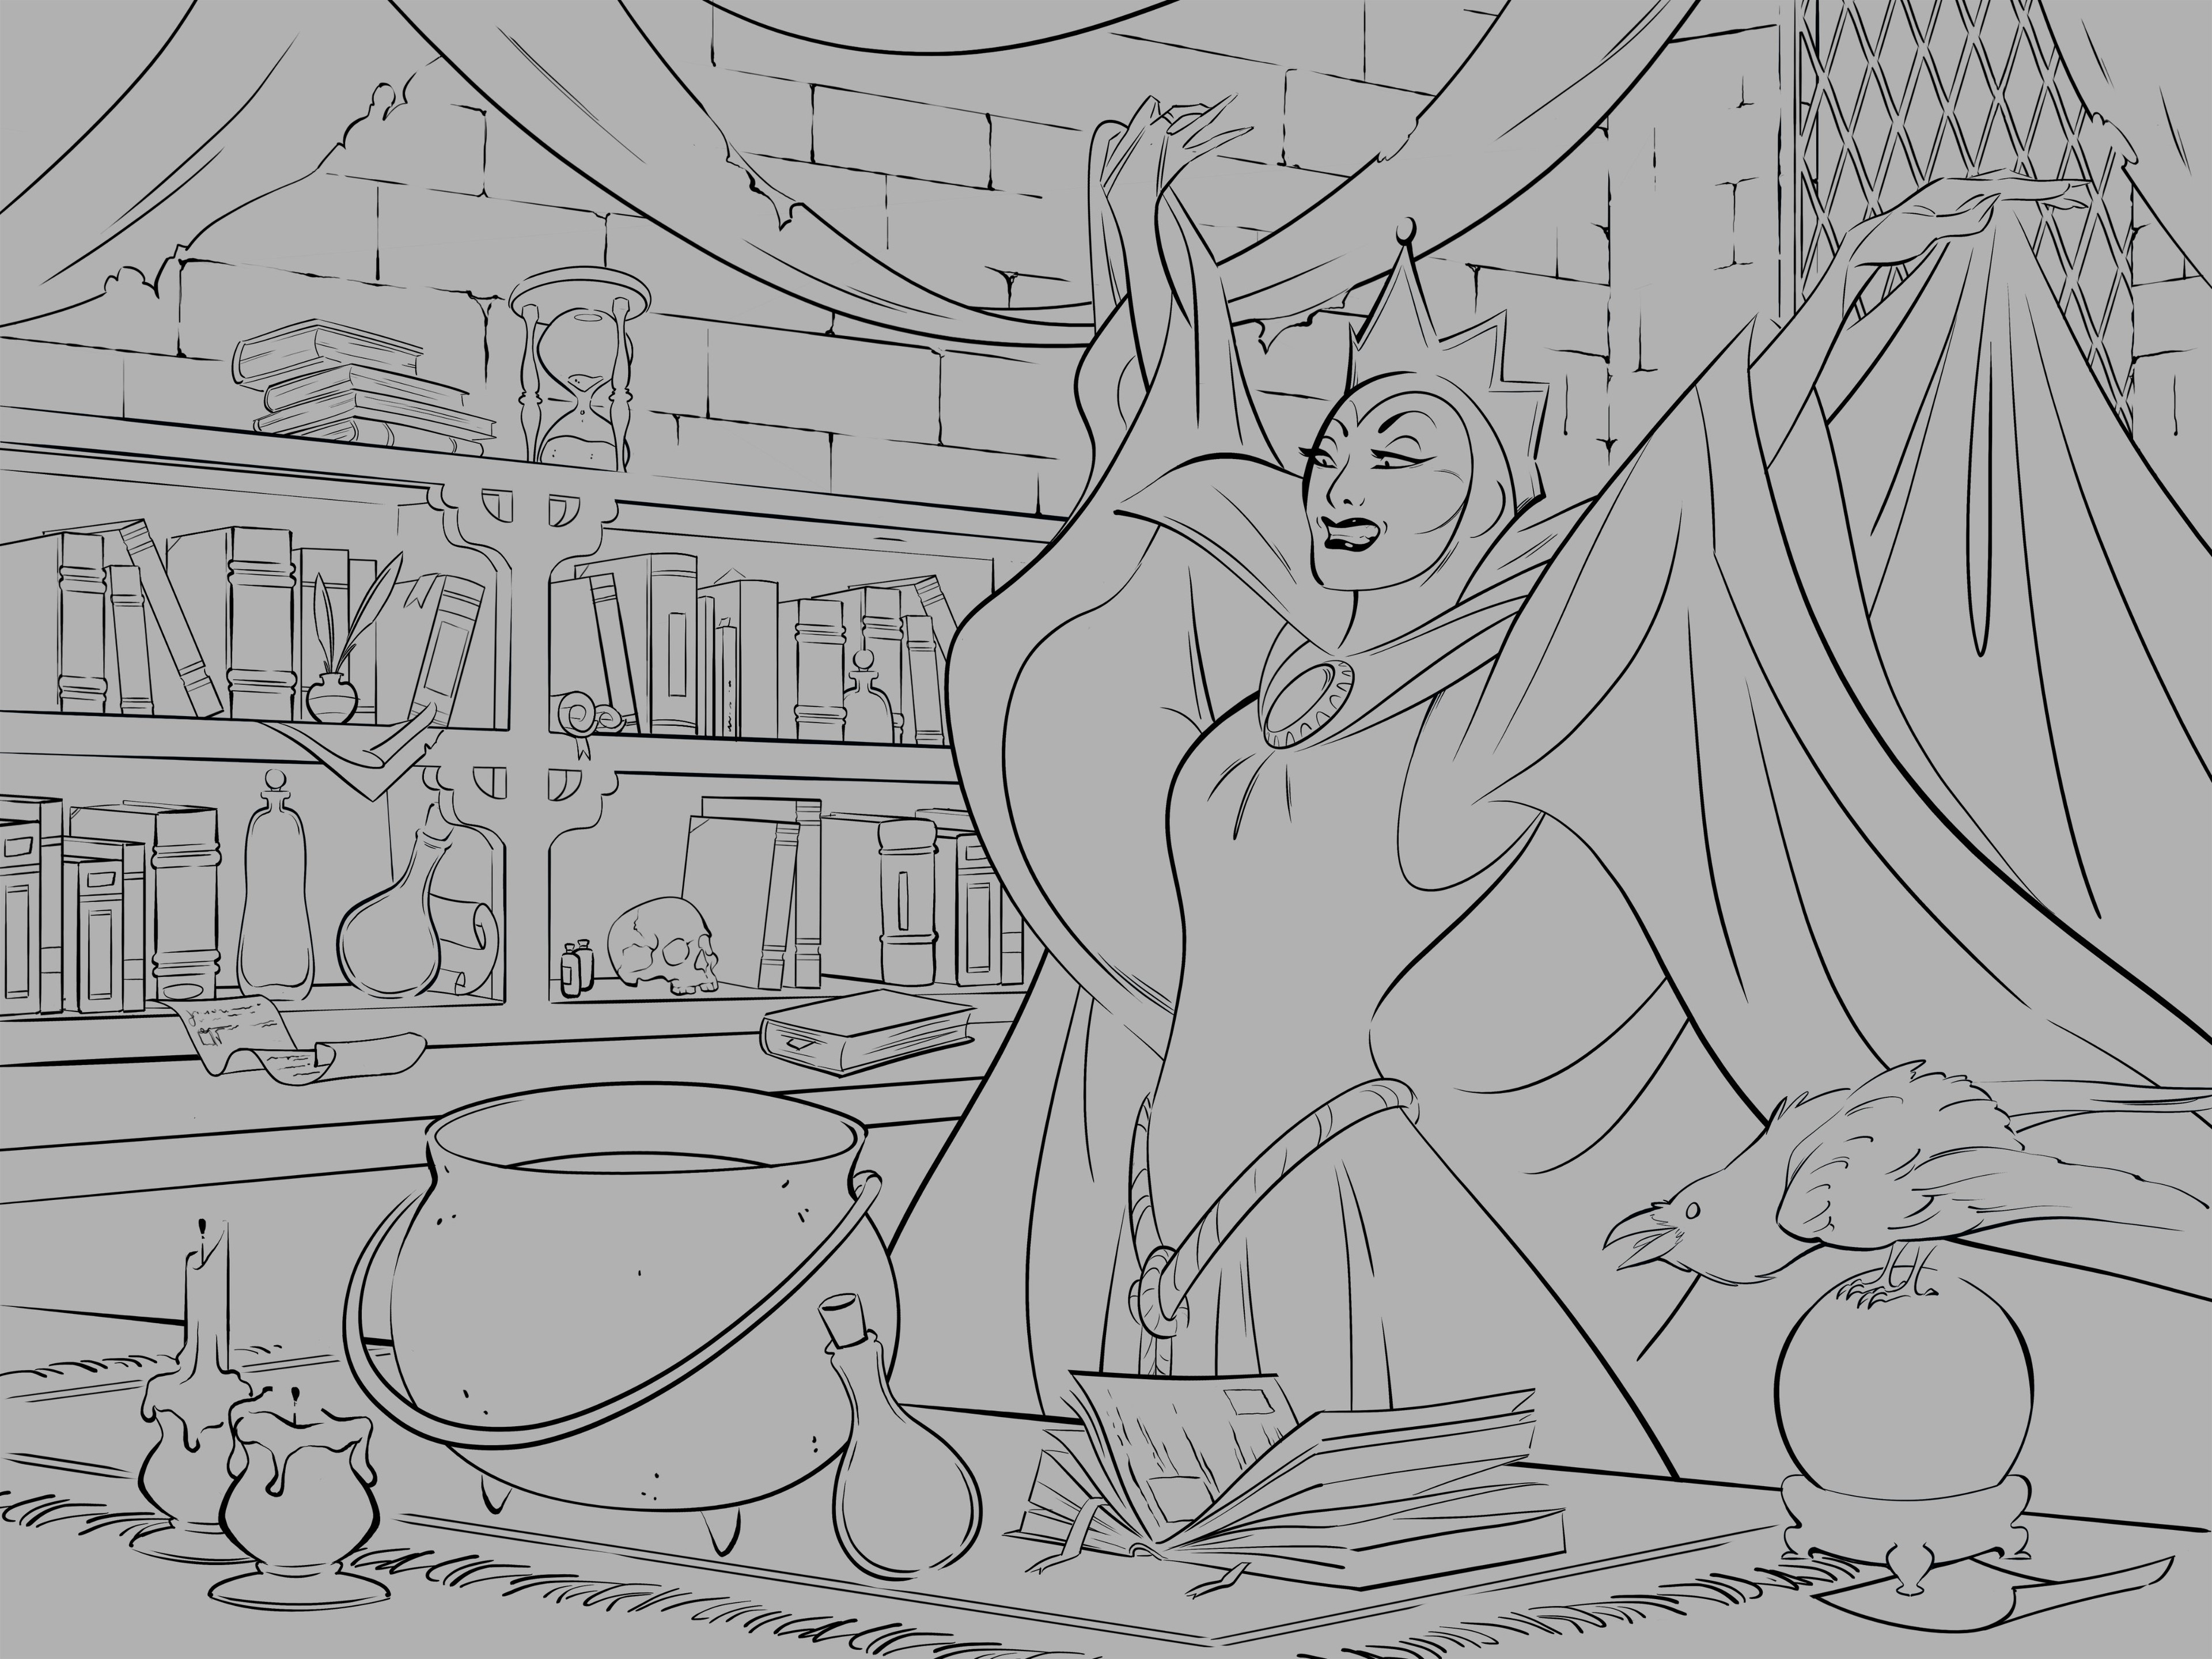 A work-in-progress of the Evil Queen from Snow White!